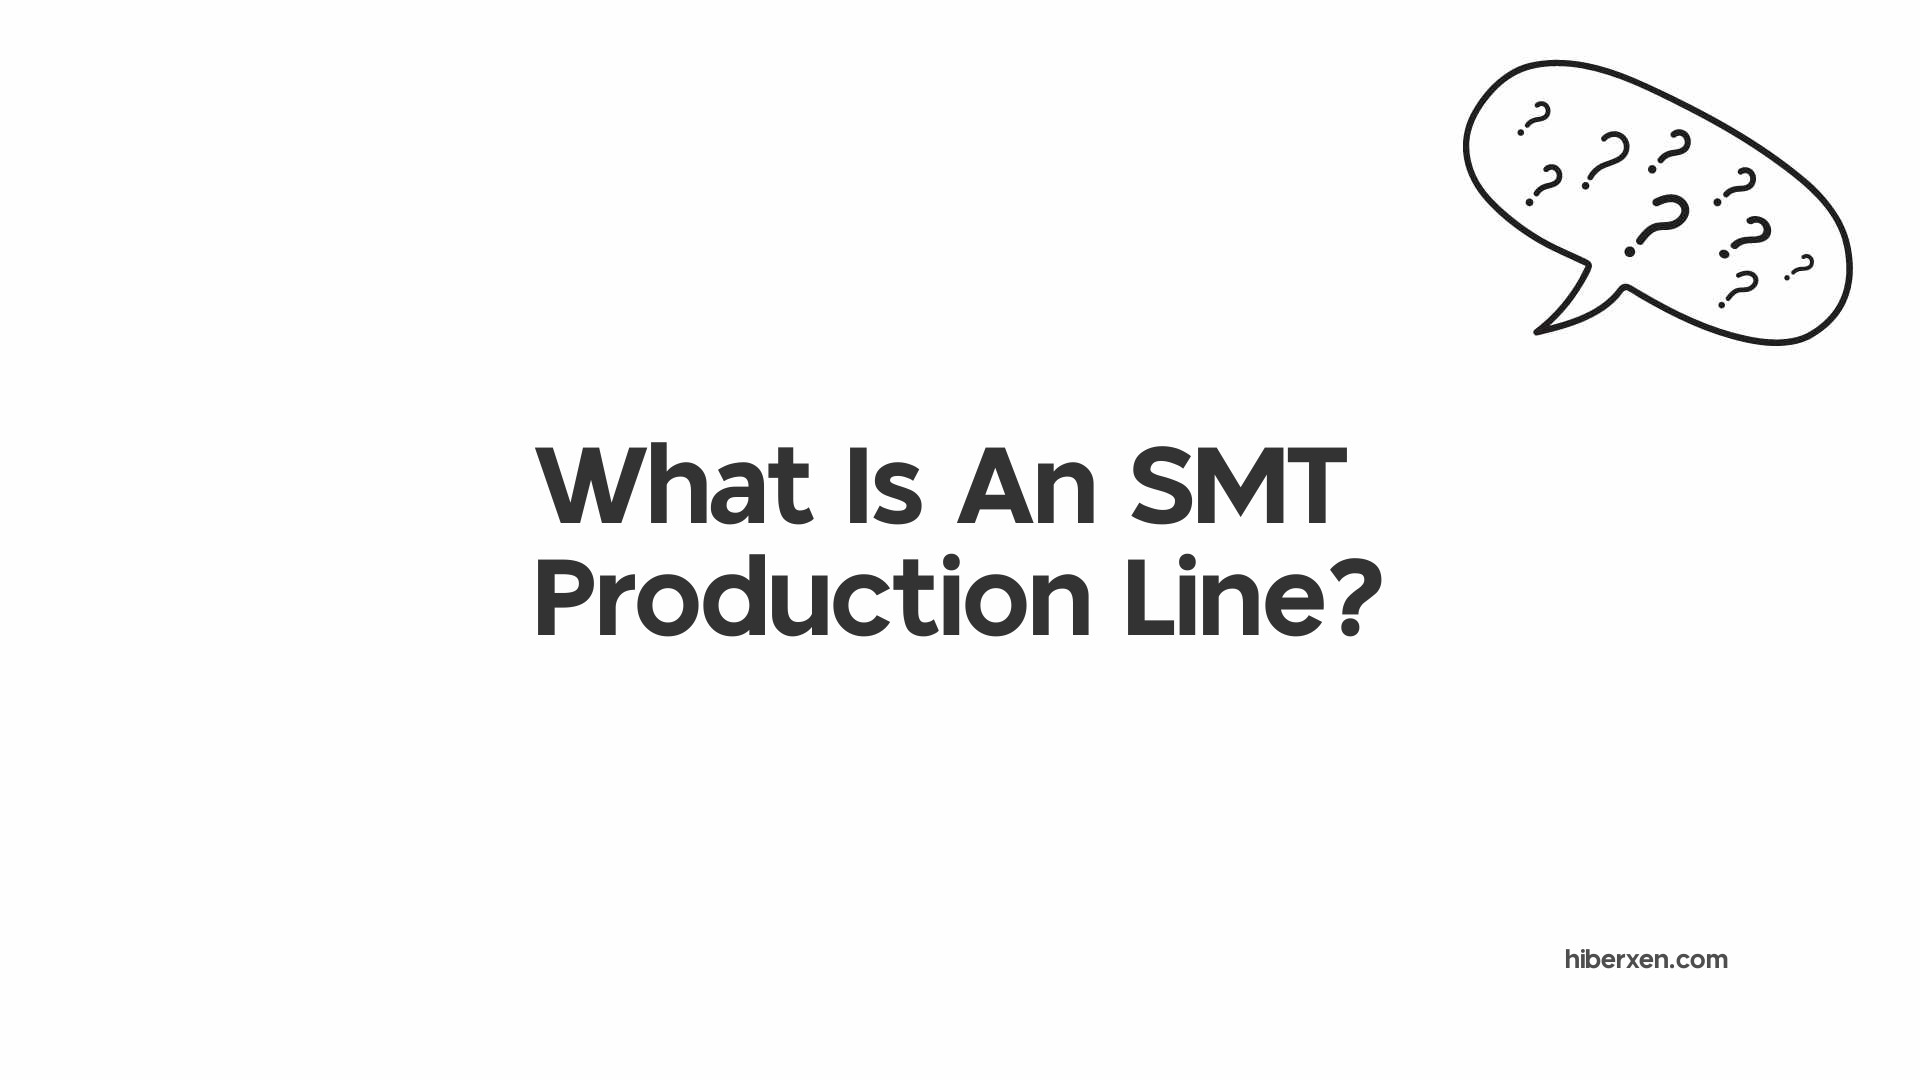 What Is An SMT Production Line?